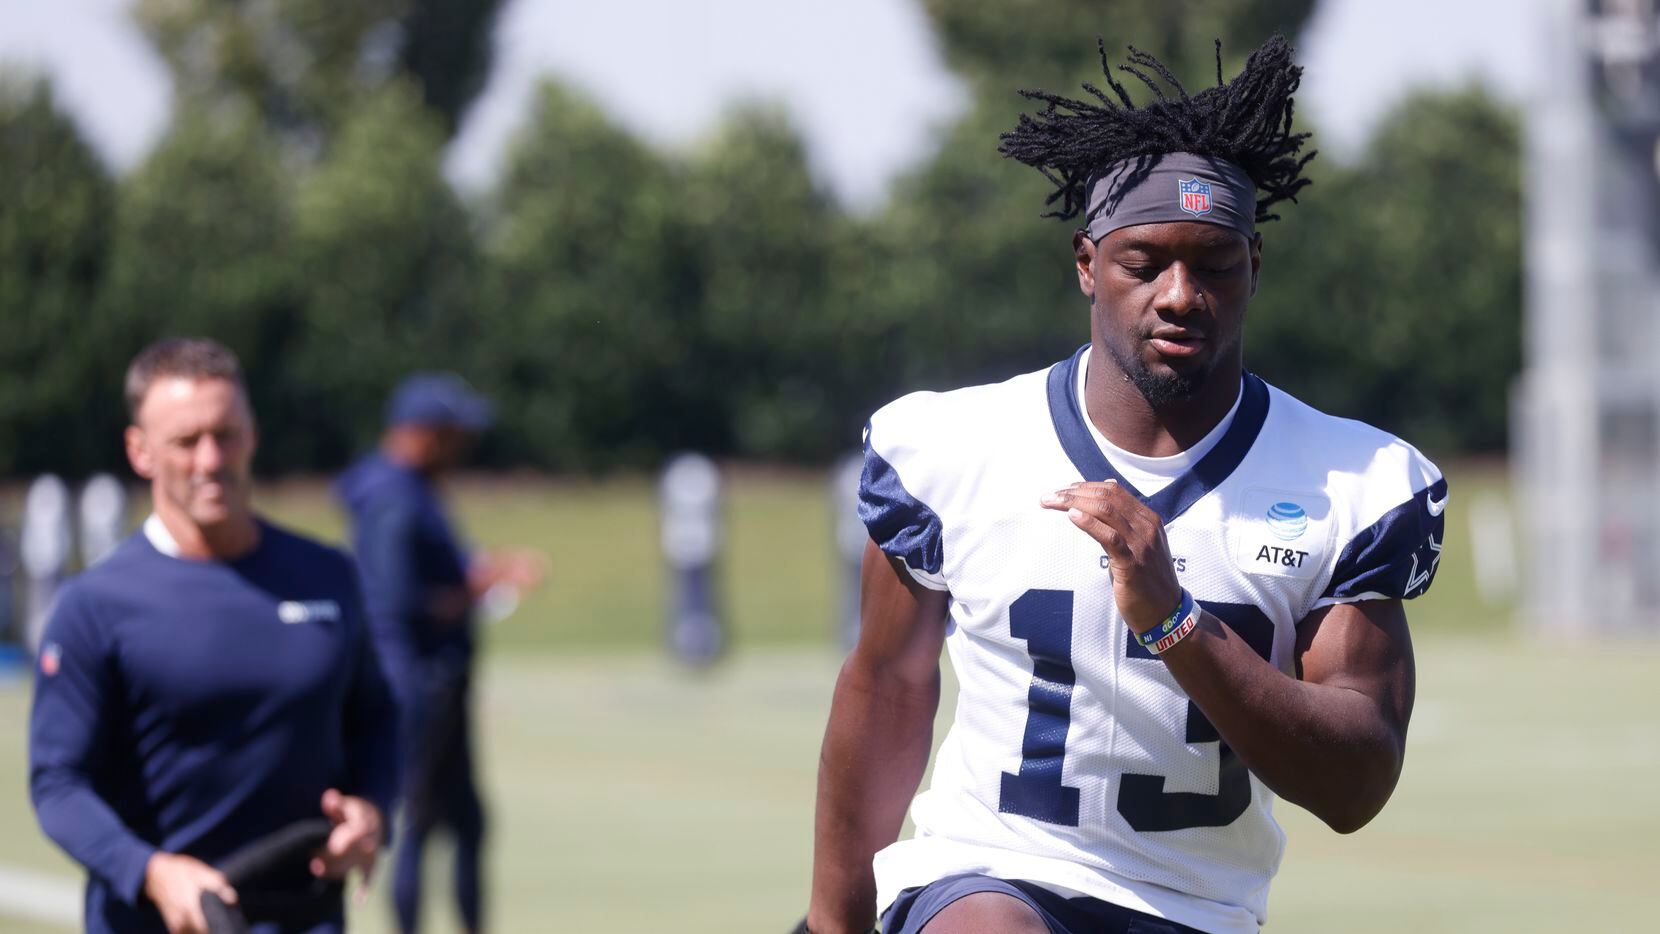 Dallas Cowboy’s wide receiver Michael Gallup (13) works with a resistance band during a...